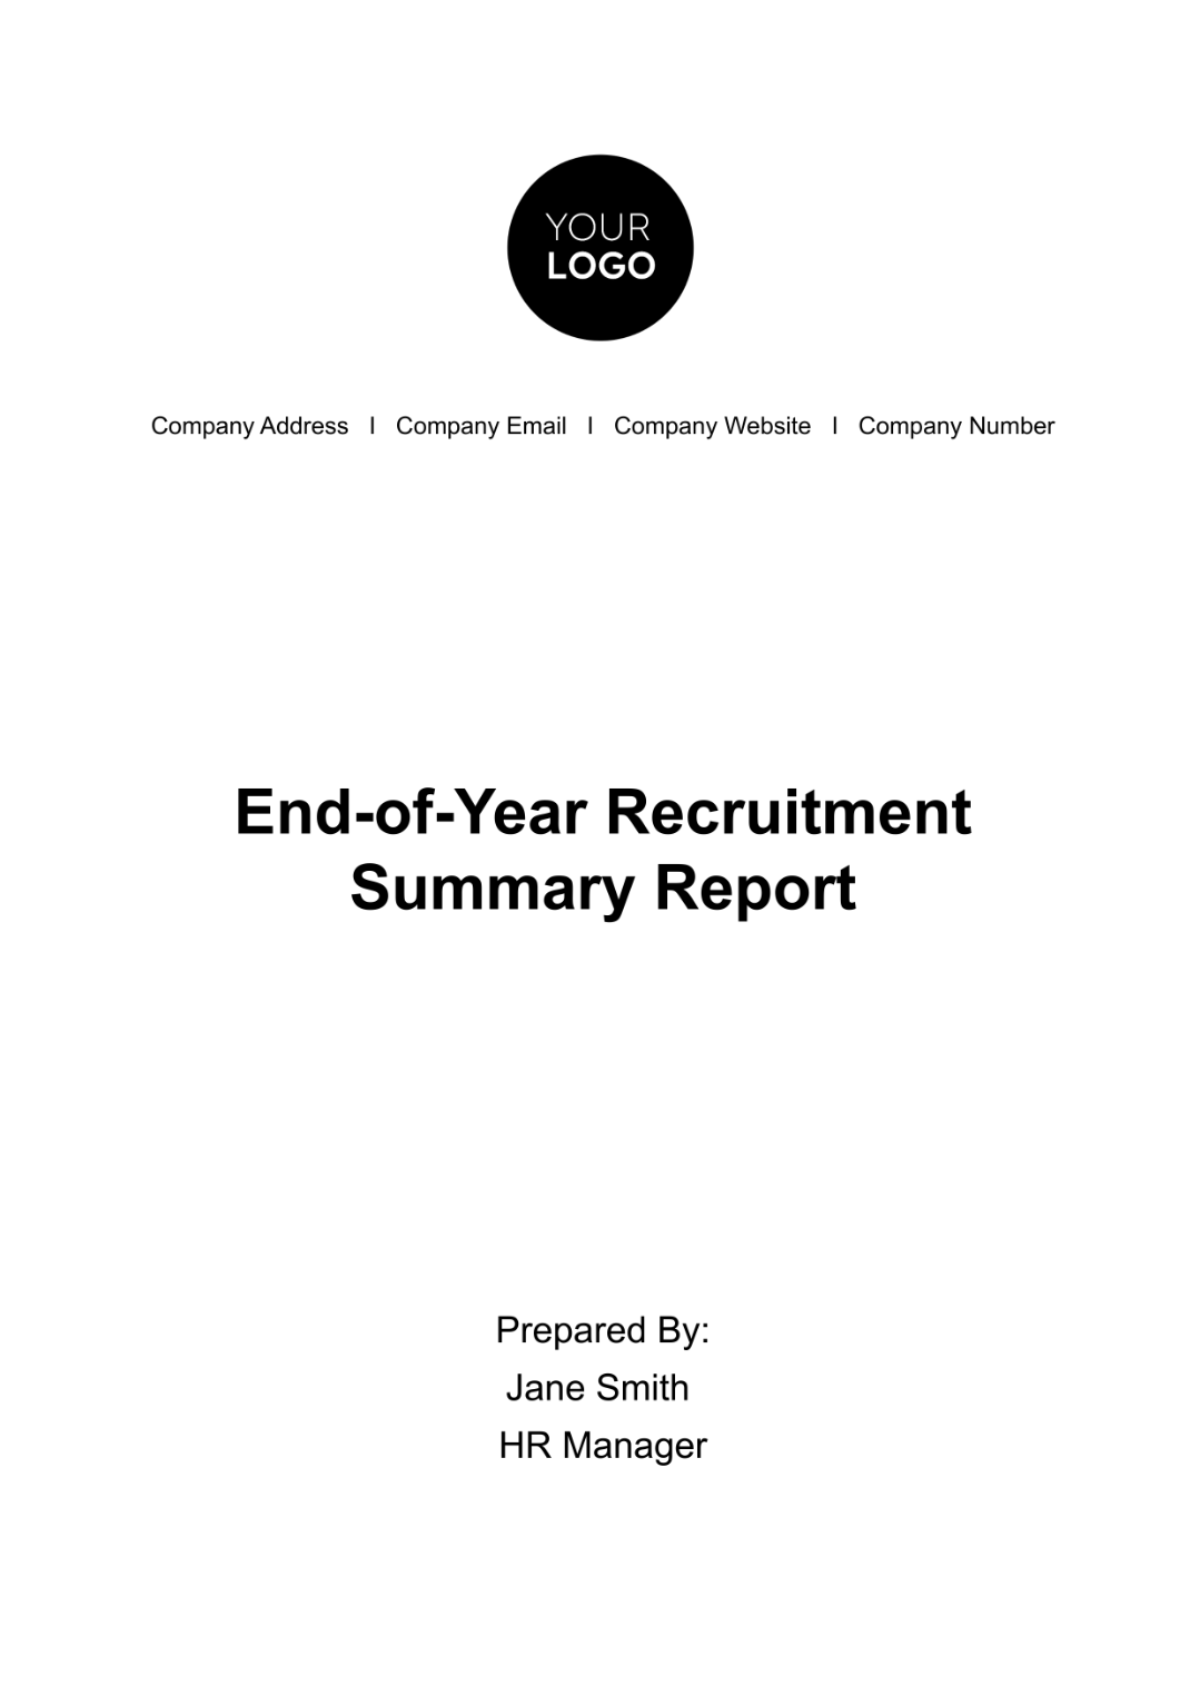 Free End-of-Year Recruitment Summary Report HR Template